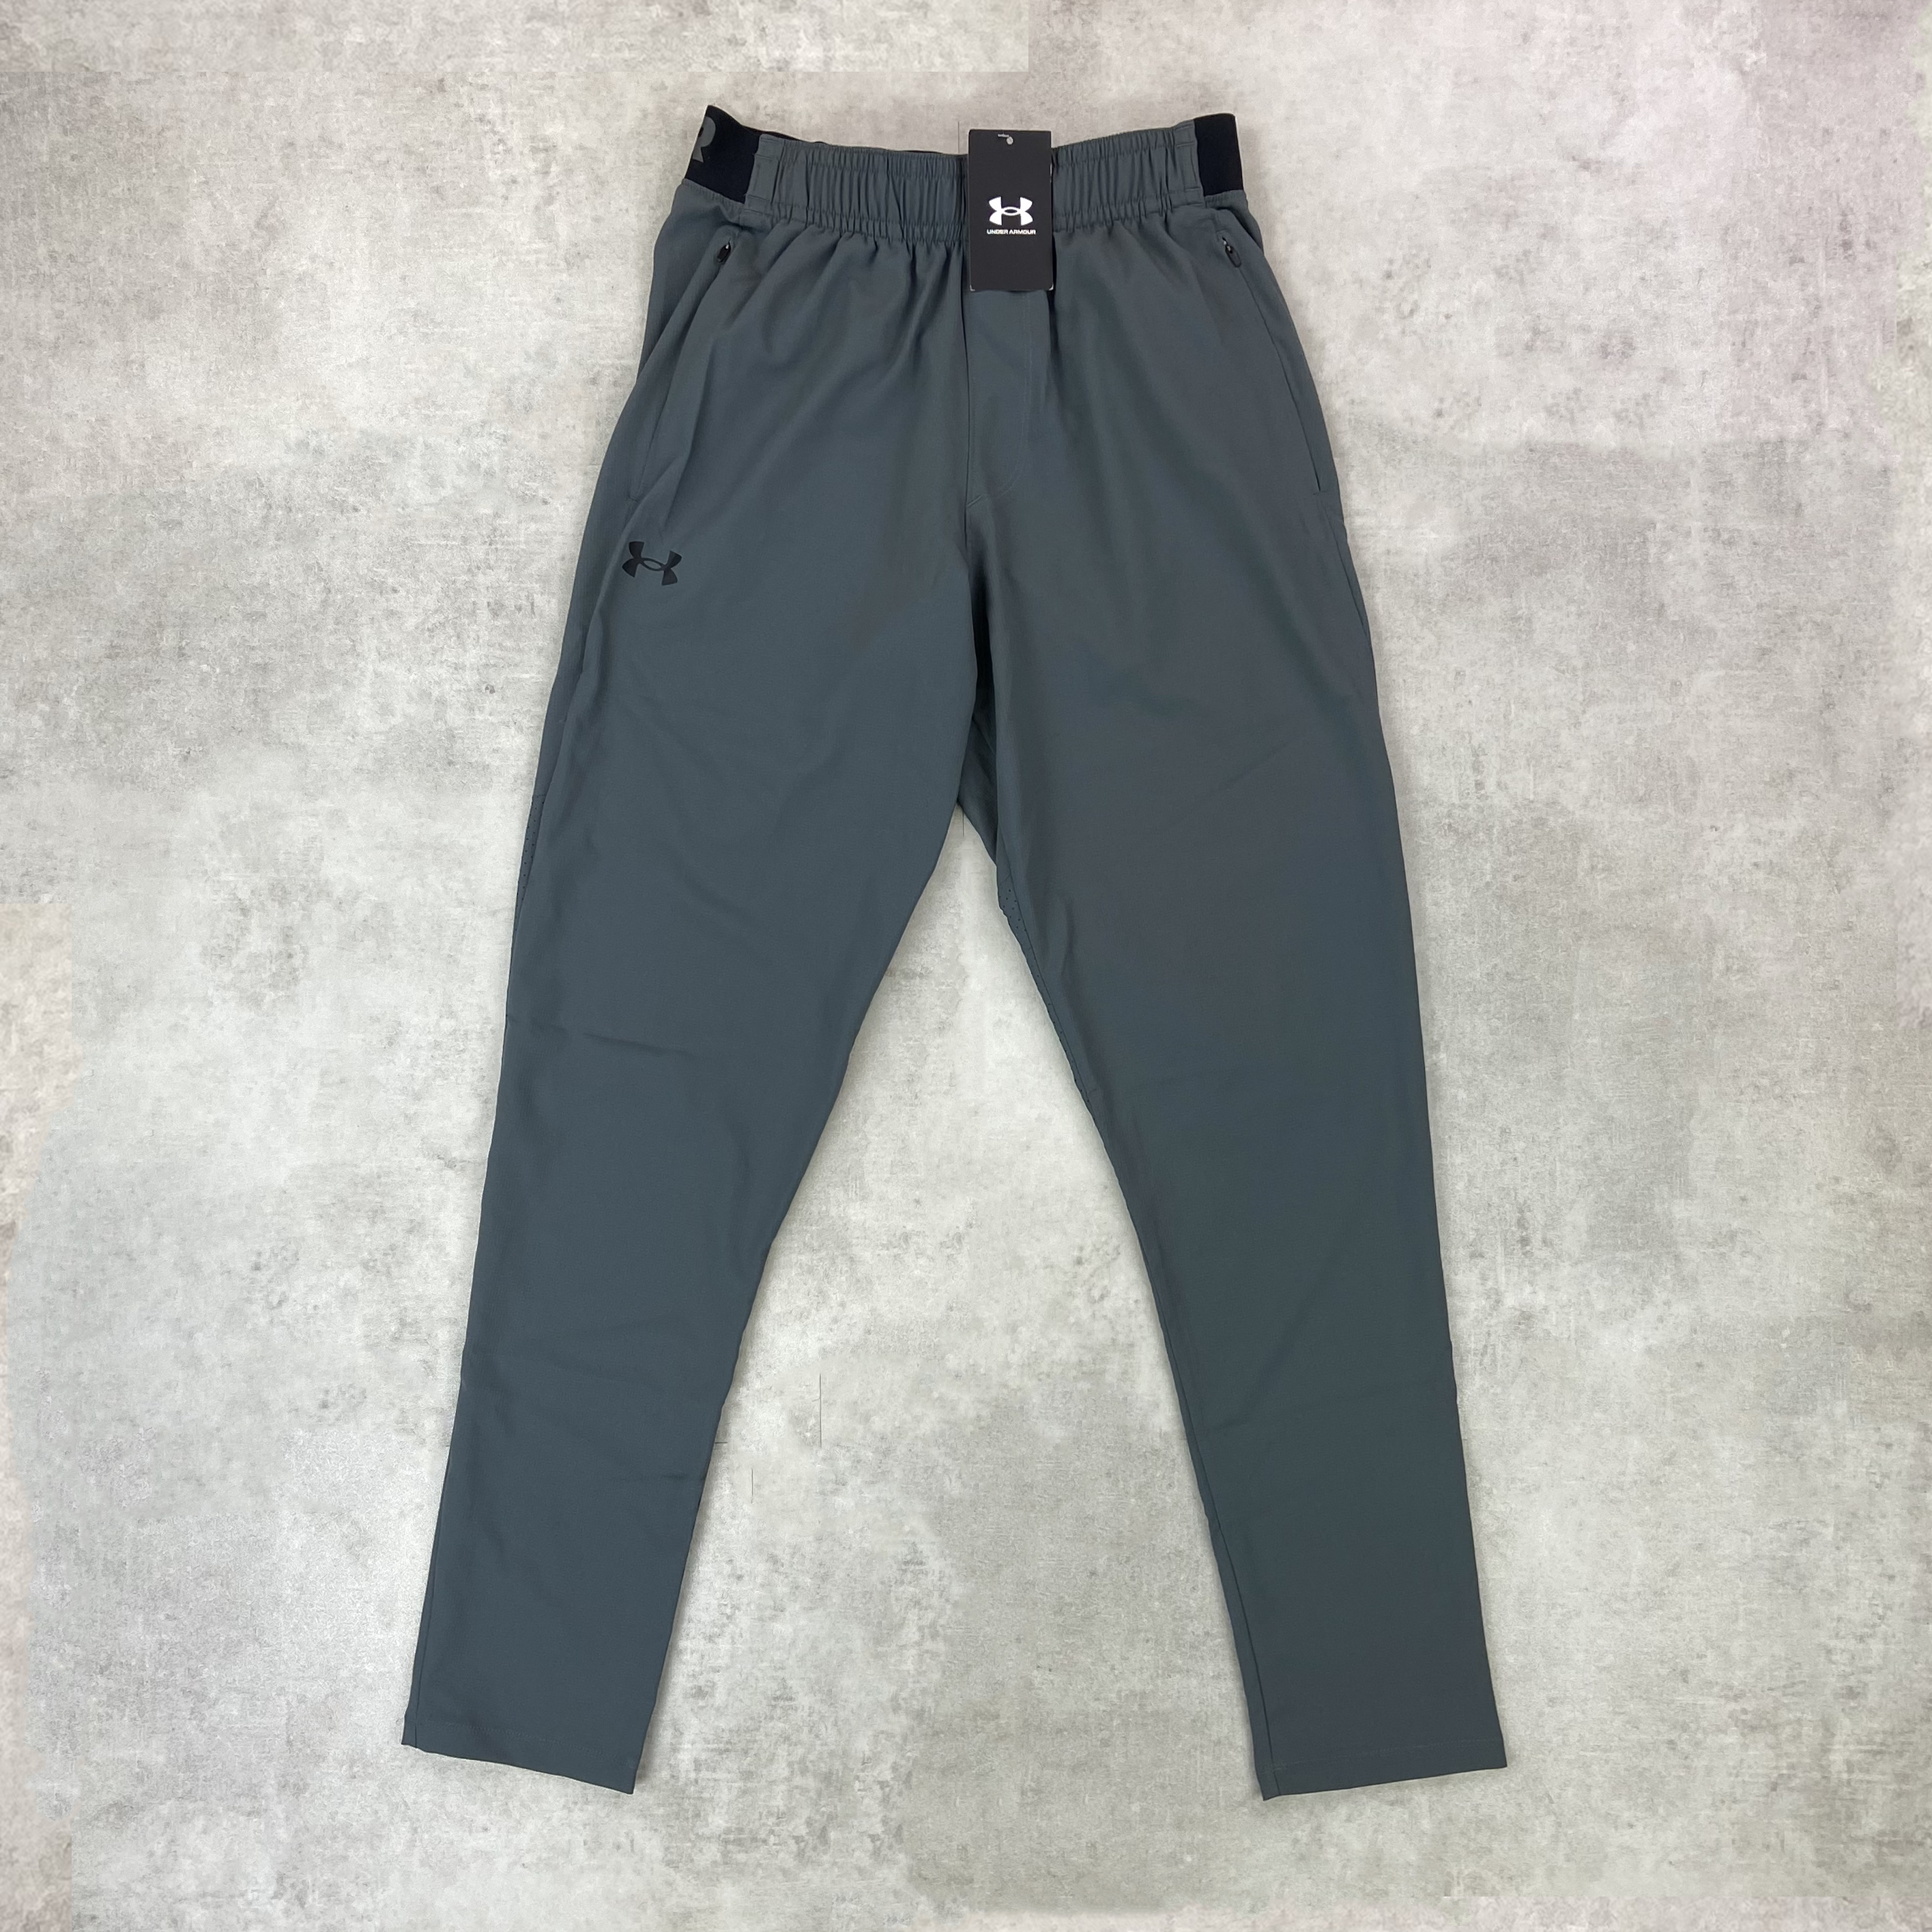 Under Armour Woven Pants Grey